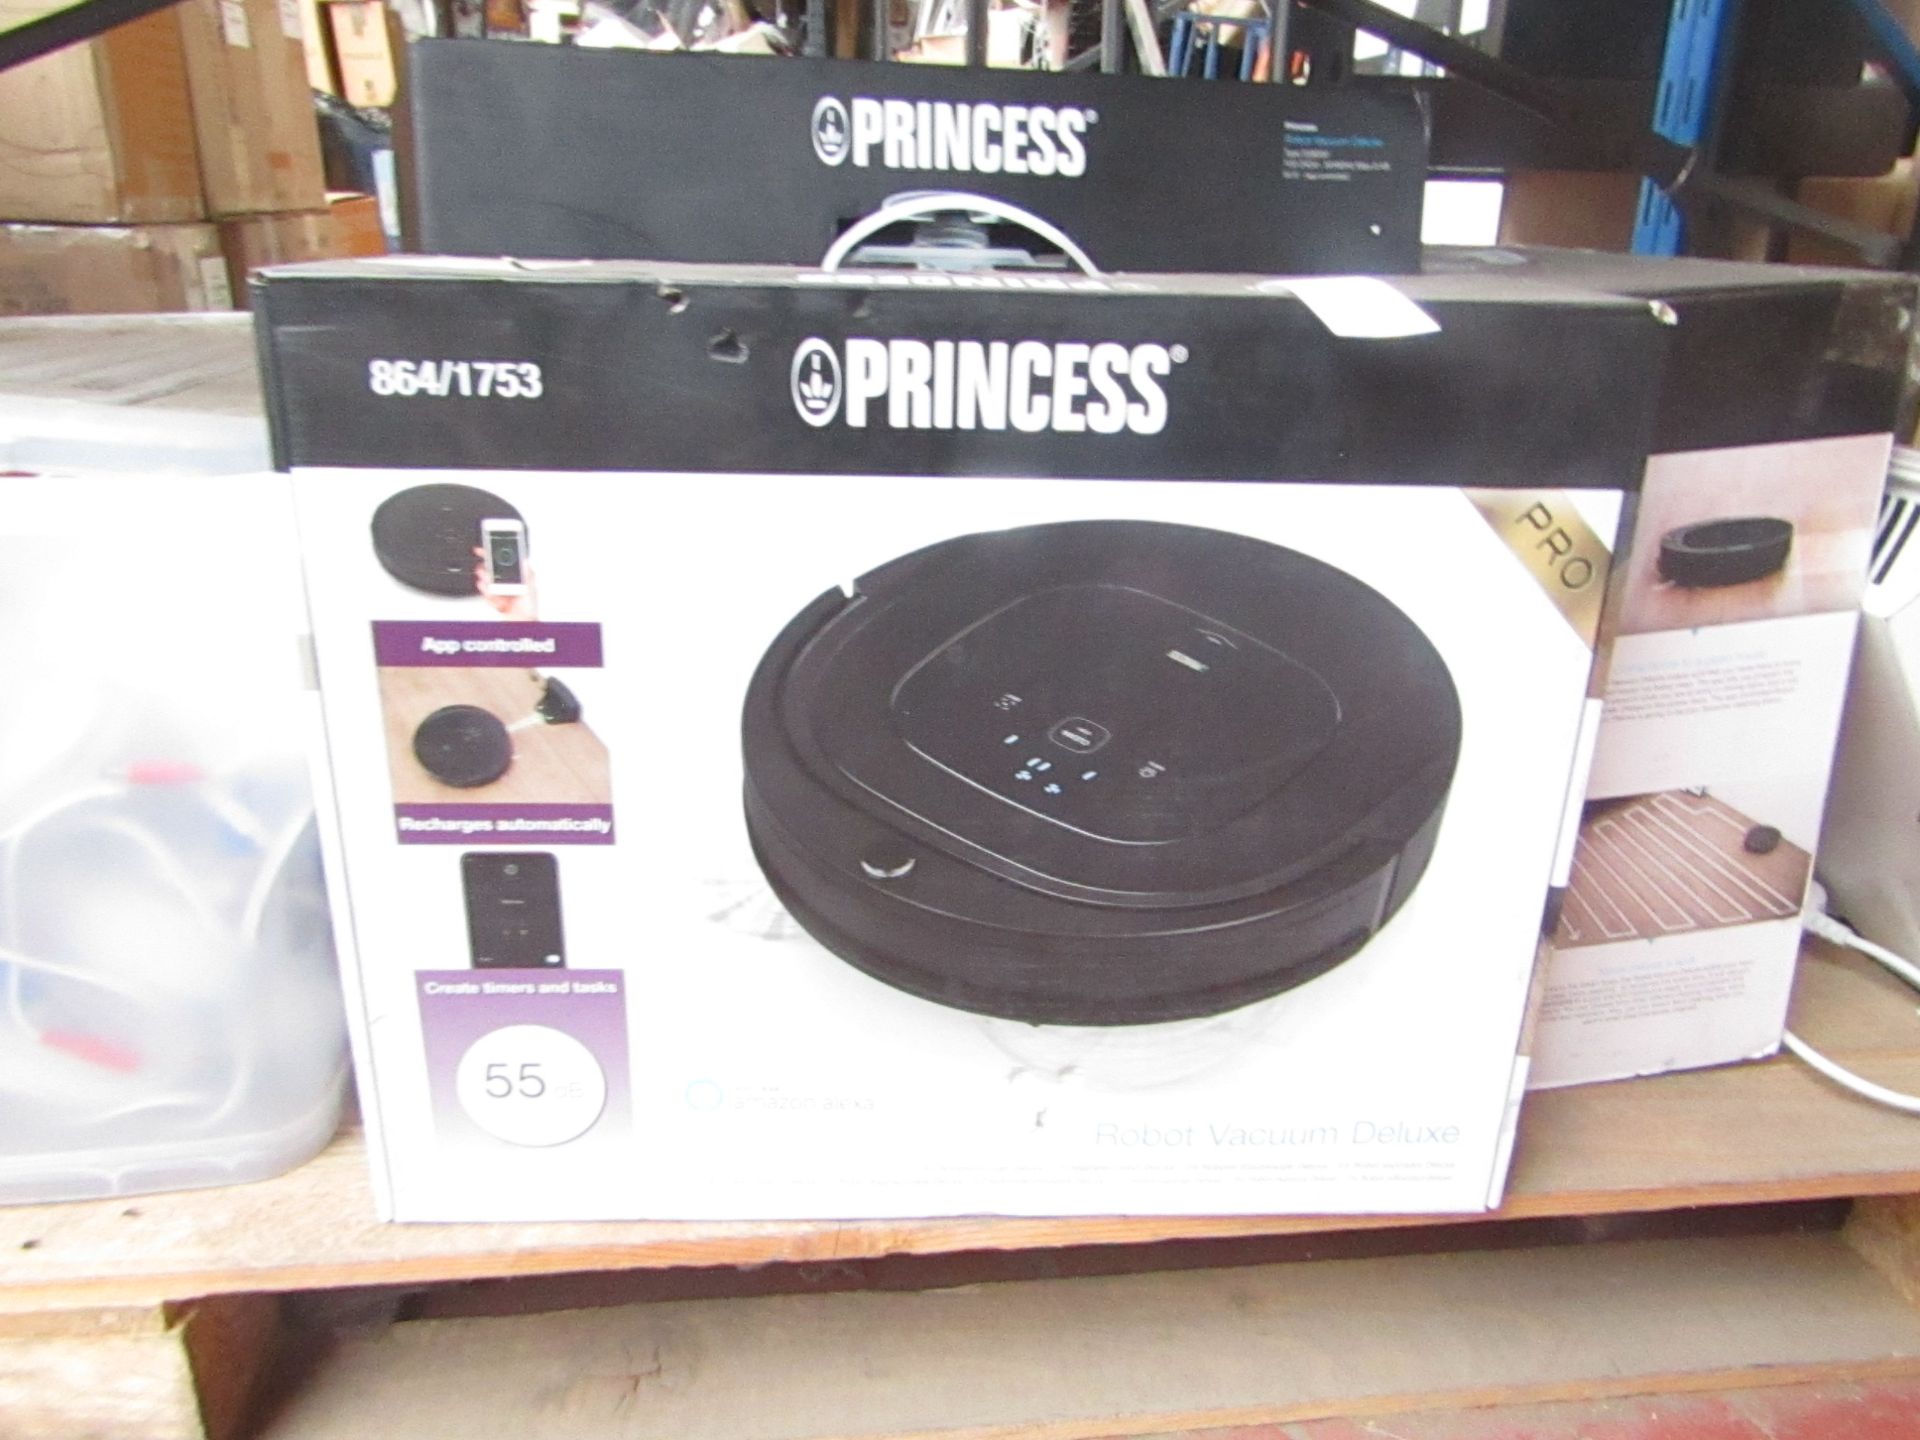 Princess robot vacuum cleaner, vendor suggests tested working and boxed.